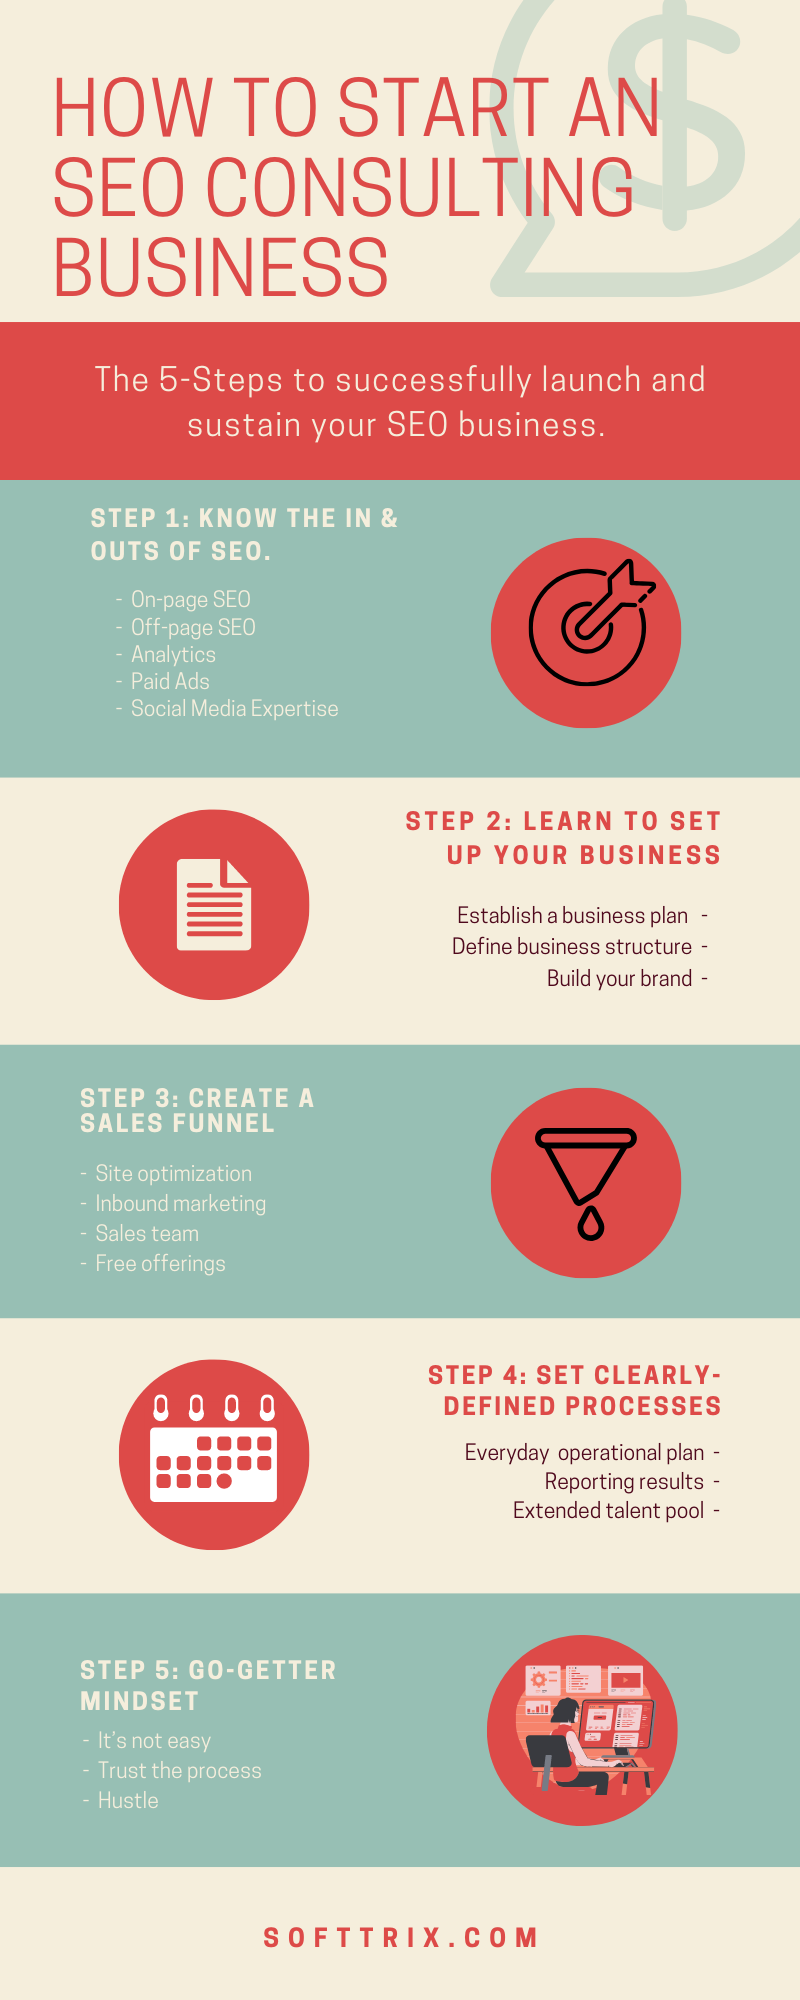 Learn How to Start SEO Consulting Business